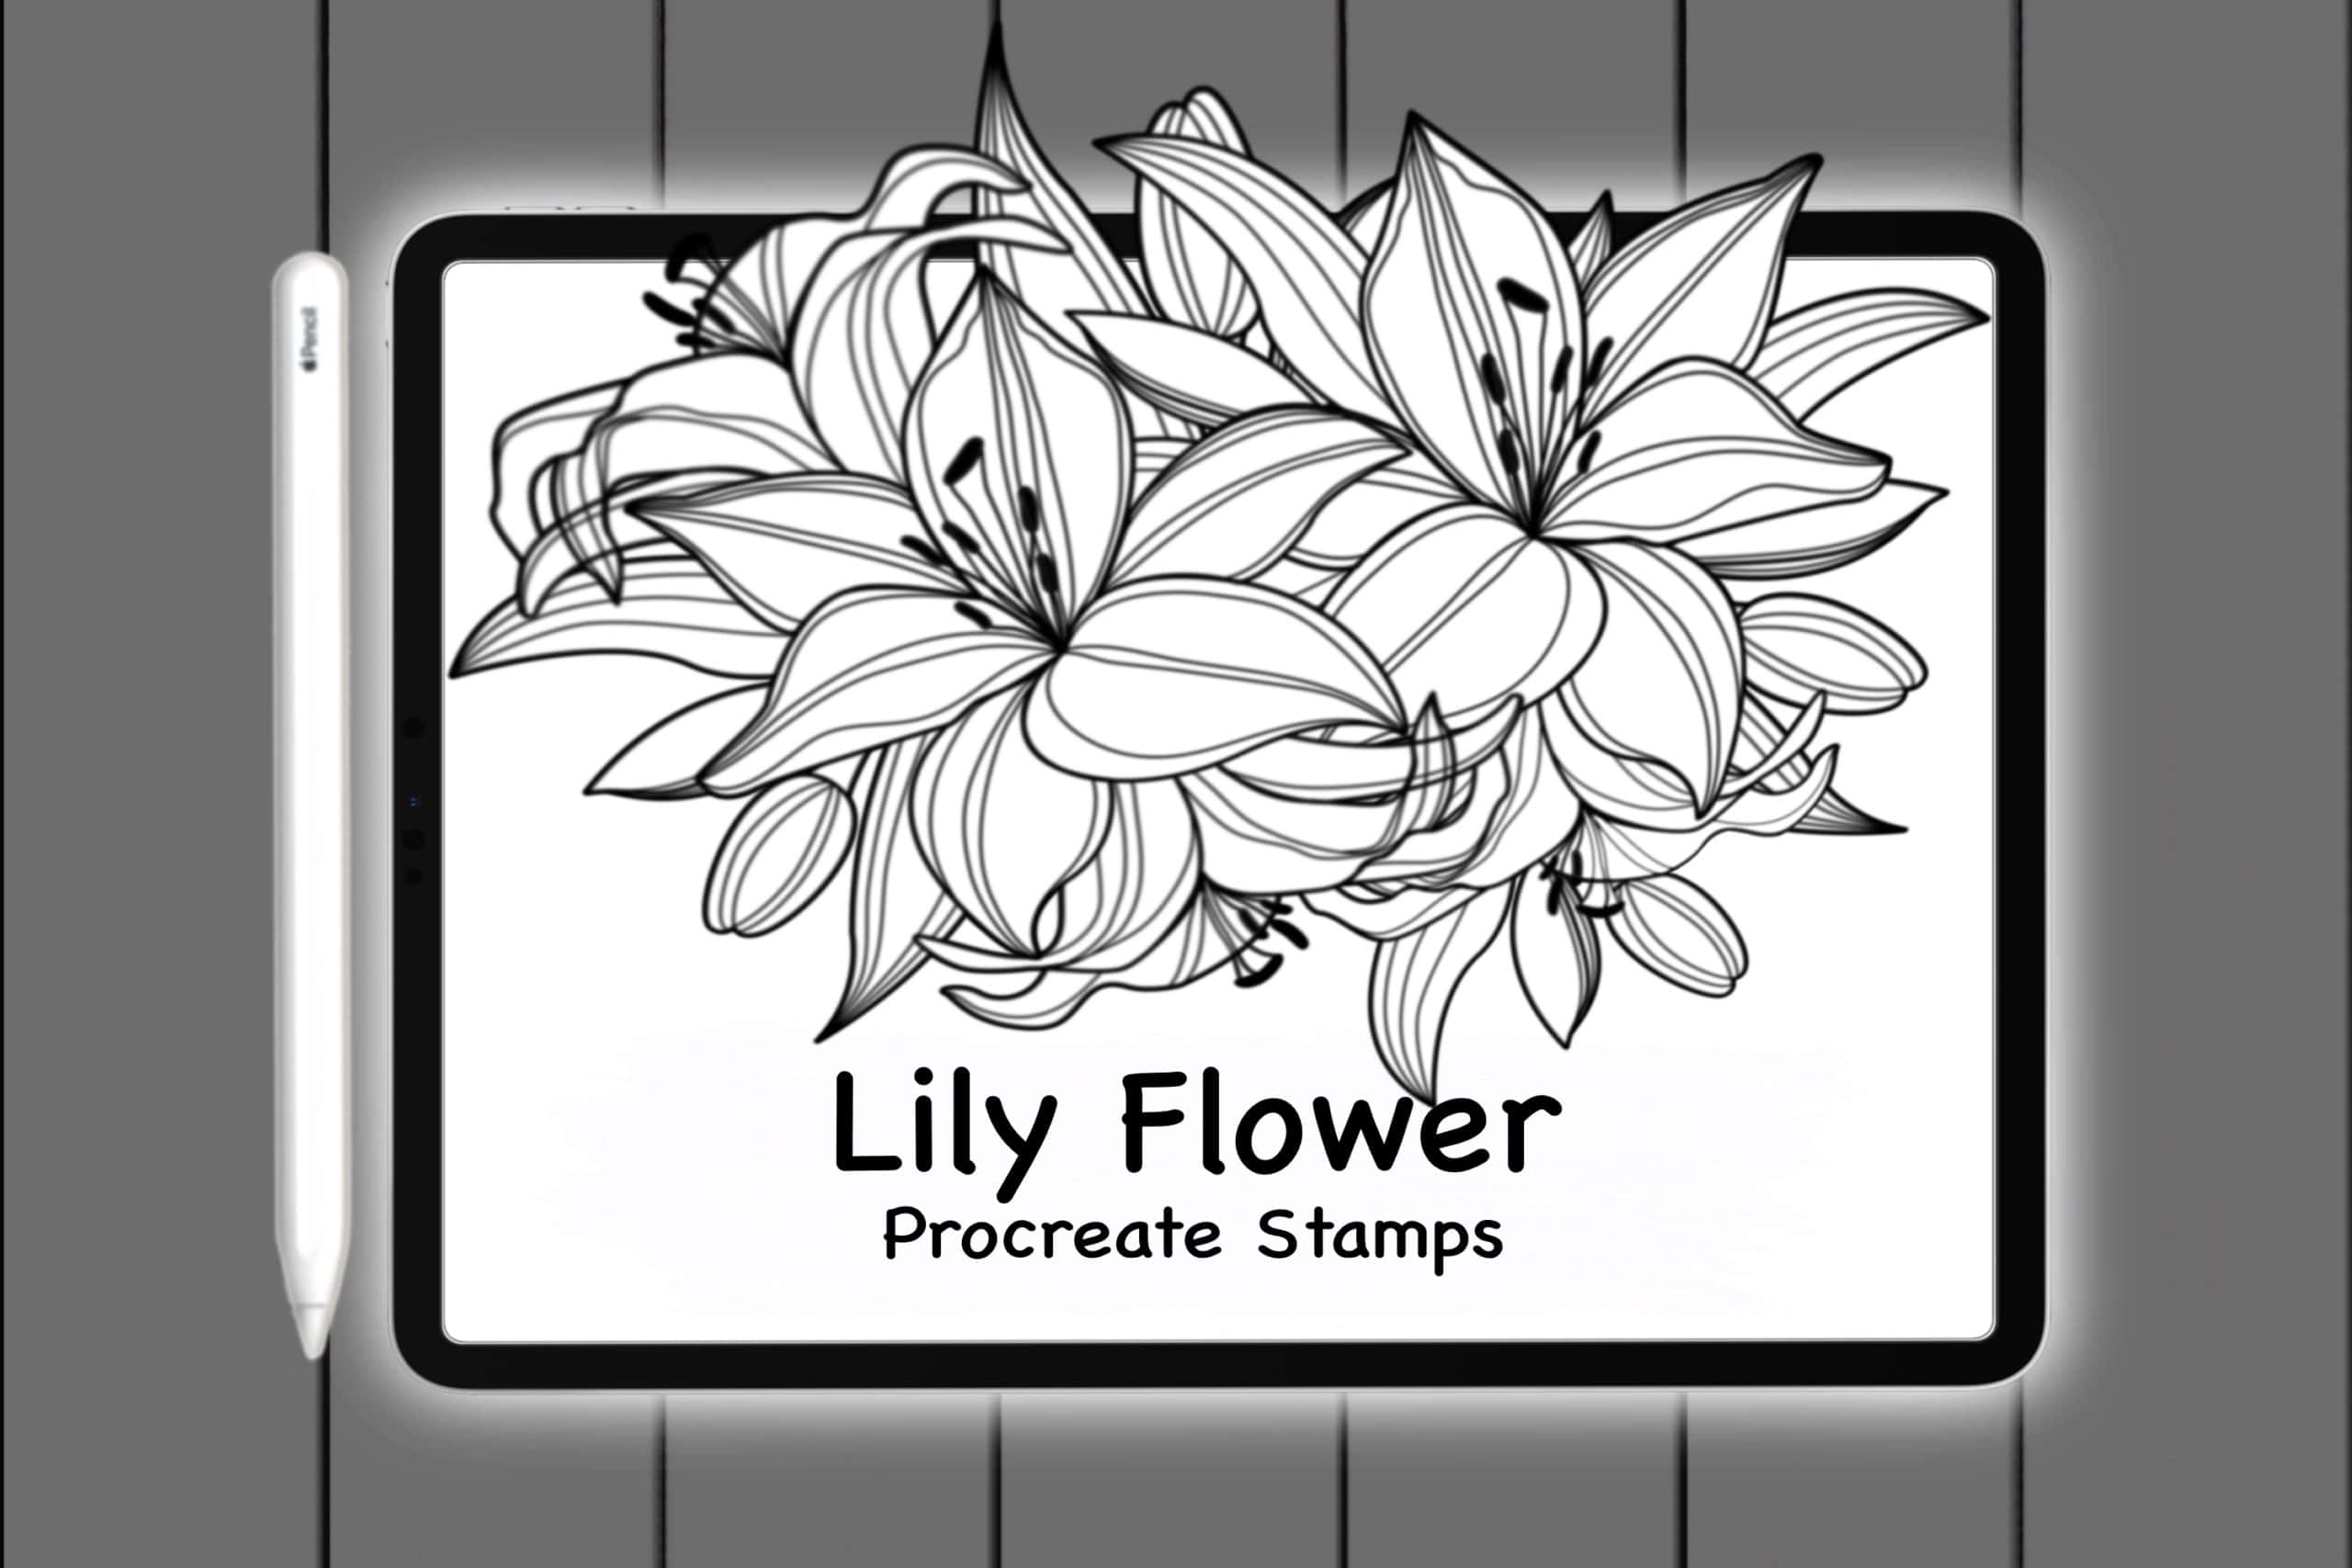 Procreate Lily Flower Doodle Brush Stamps